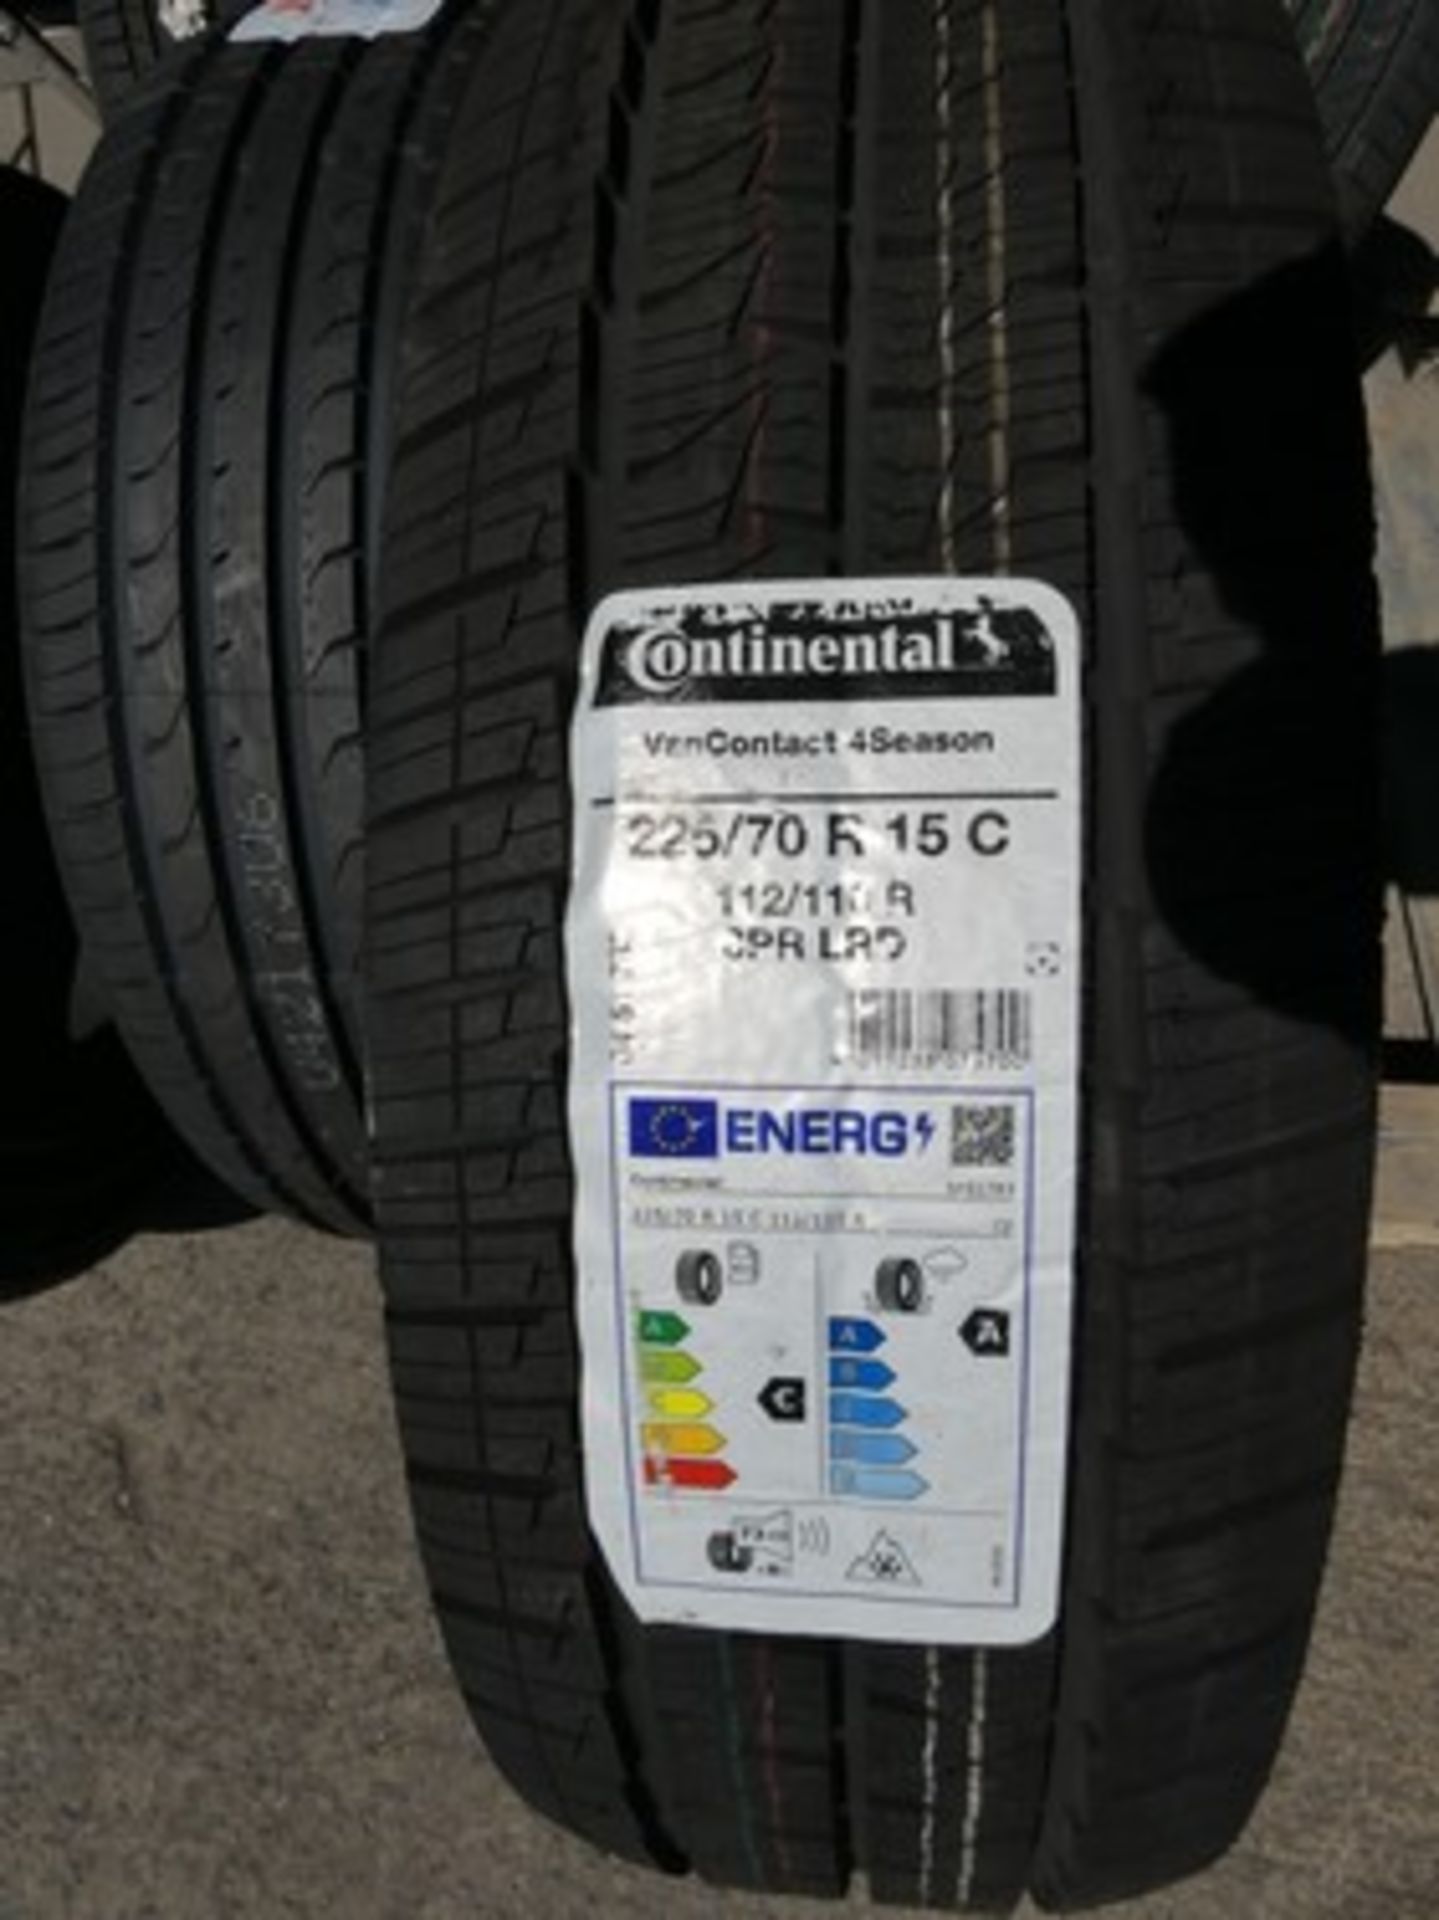 1 x Continental Van Contact All Season tyre, size 225/70R15 - New with label (pallet 5)